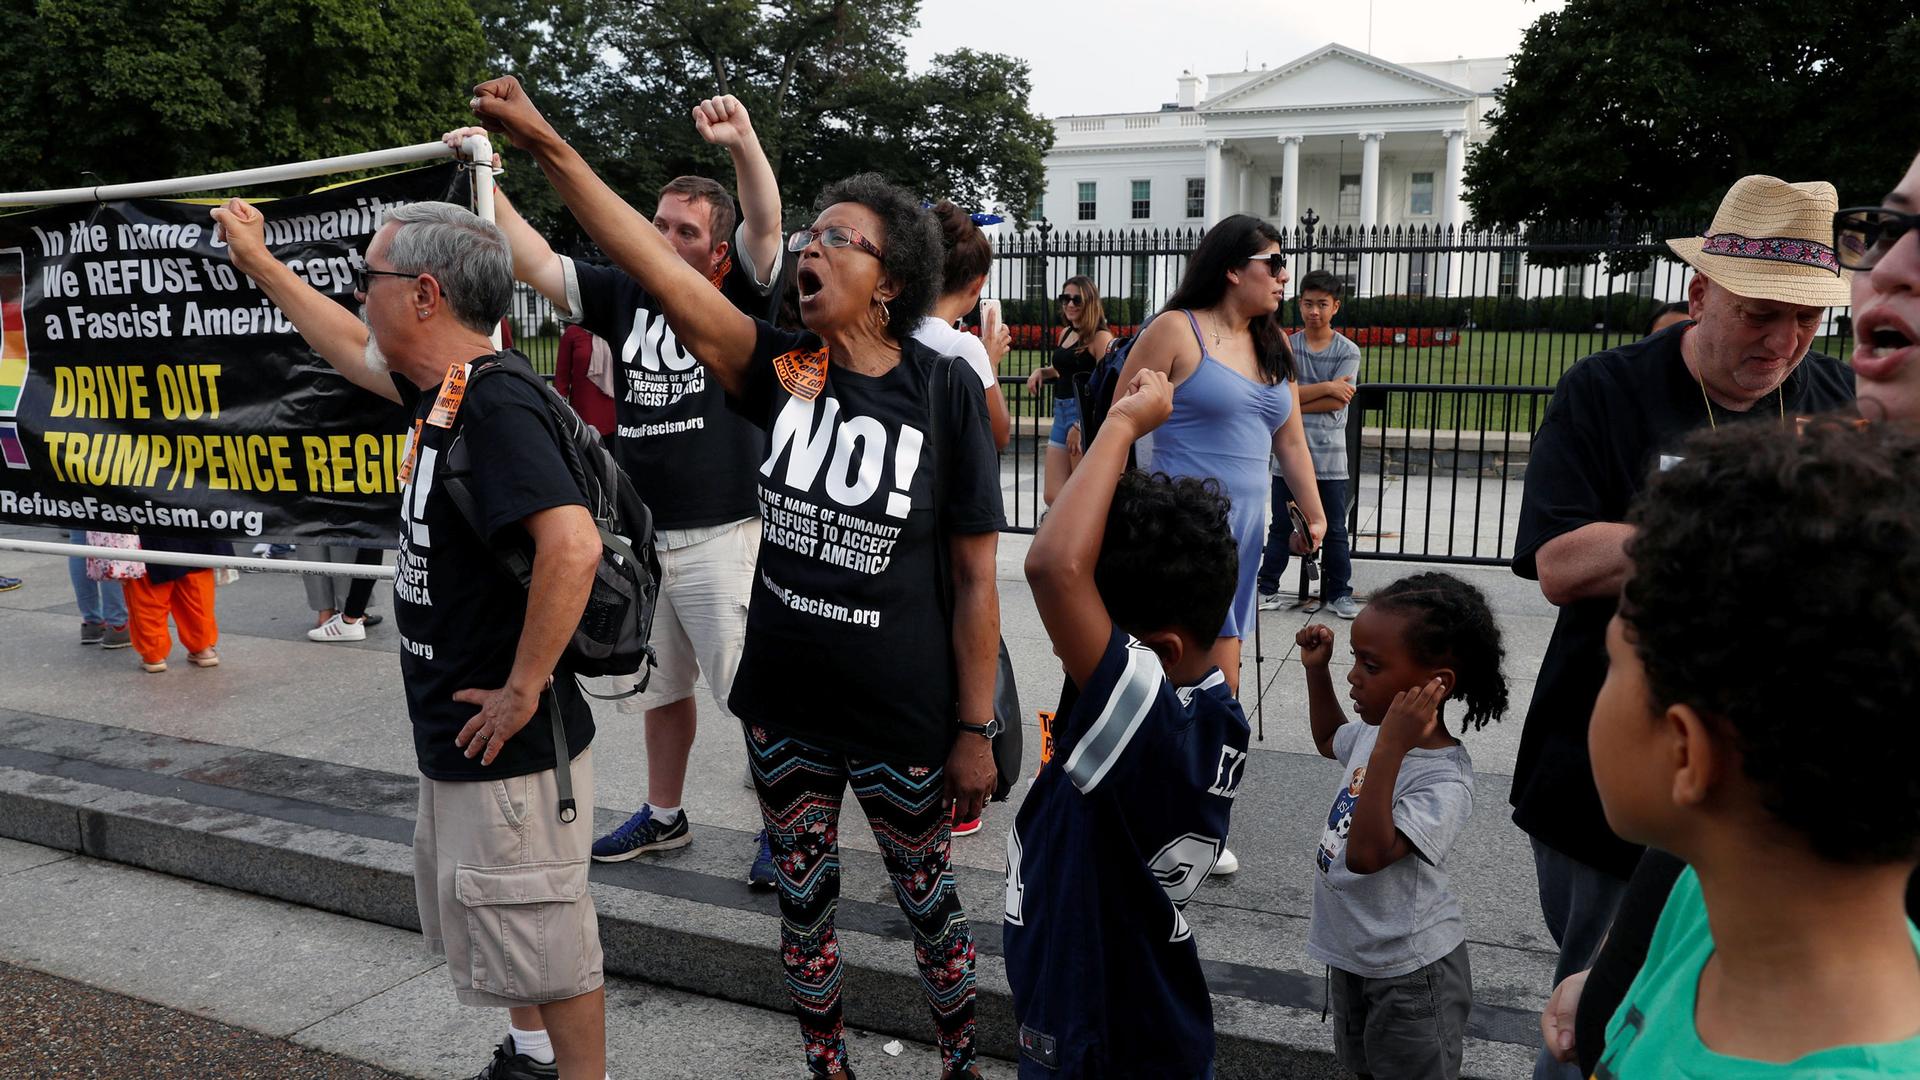 People stand in front of the White House with a sign that says "Drive out Trump-Pence regime"